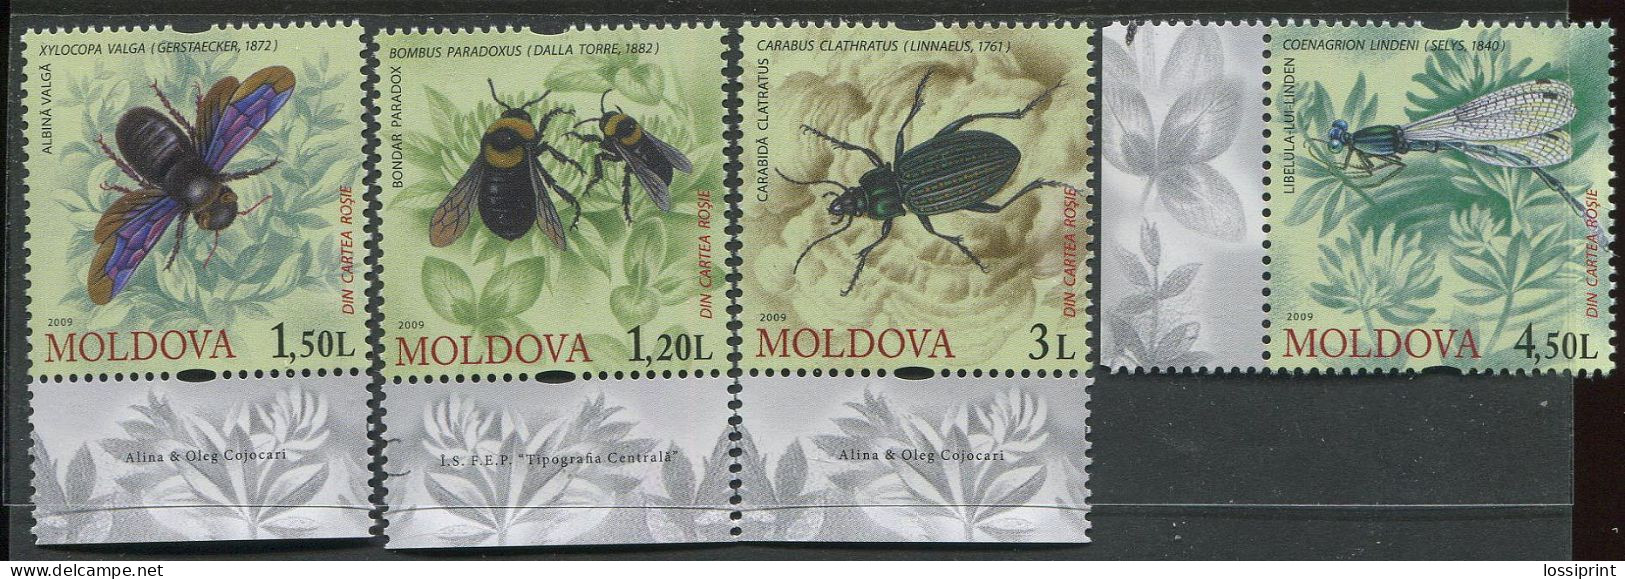 Moldova:Unused Stamps Serie Dragonfly, Bee, Beetle, 2009, MNH - Abeilles